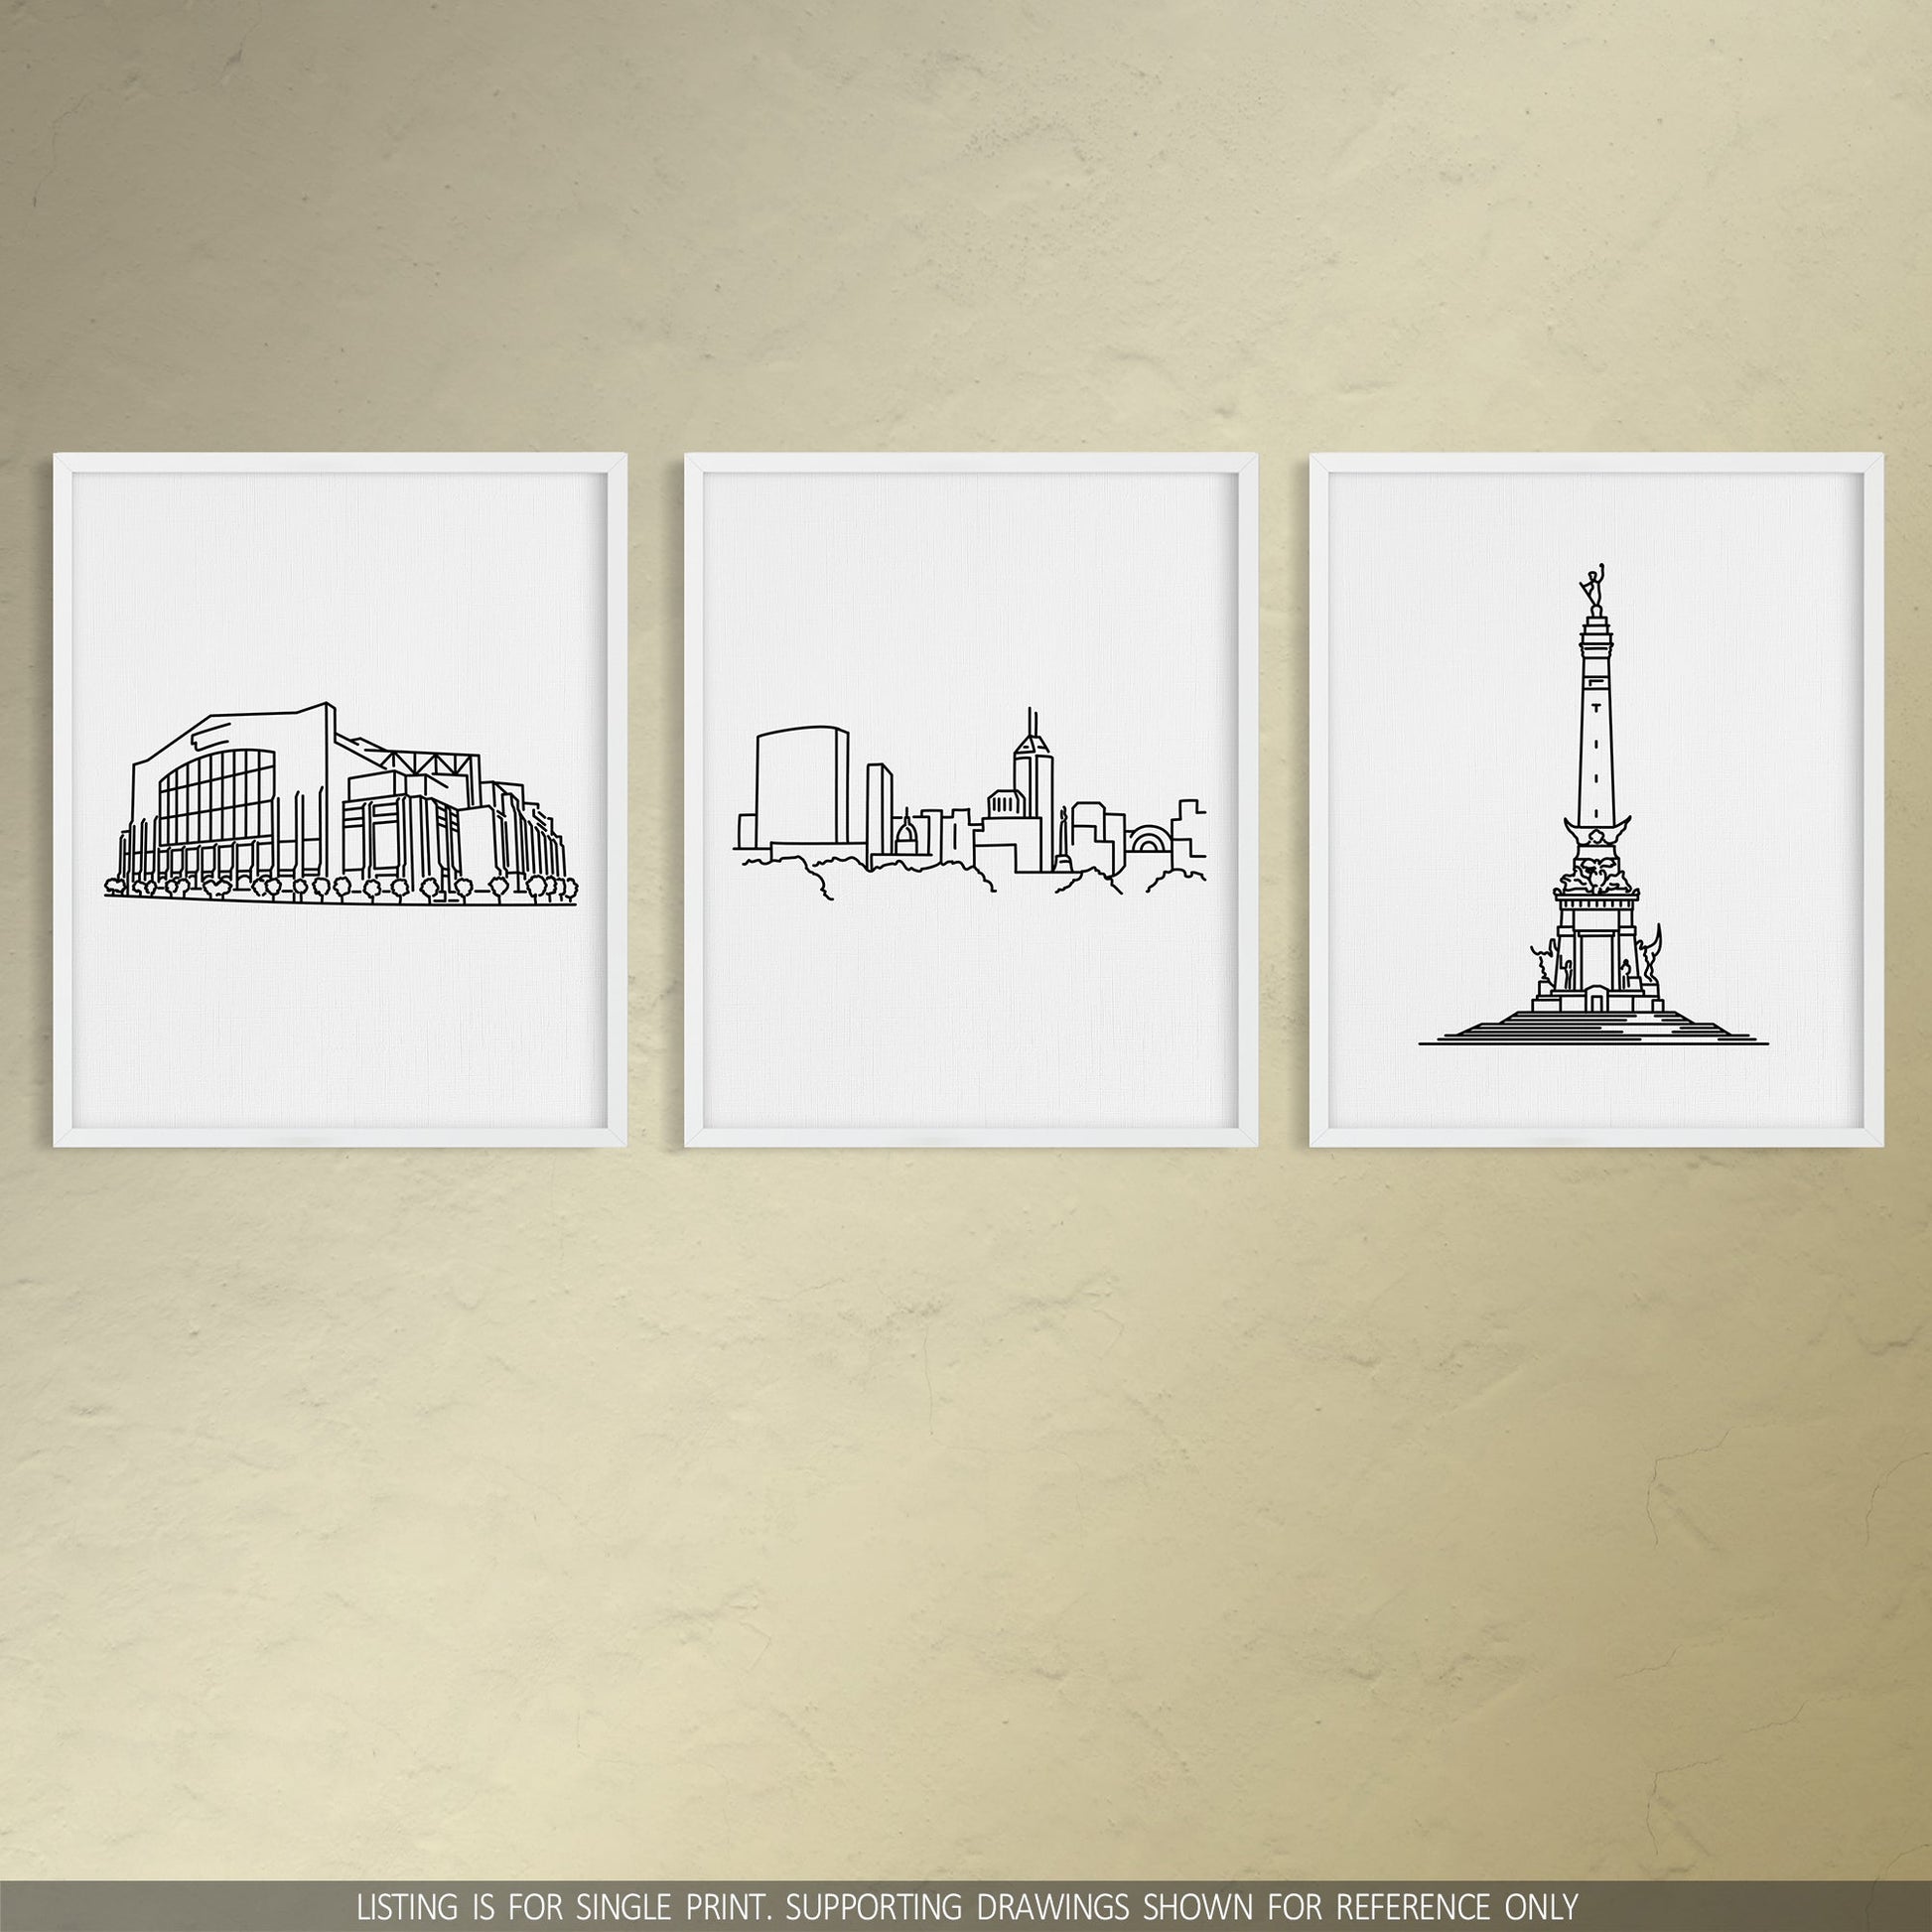 A group of three framed drawings on a wall. The line art drawings include the Colts Stadium, Indianapolis Skyline, and Soldiers and Sailors Monument